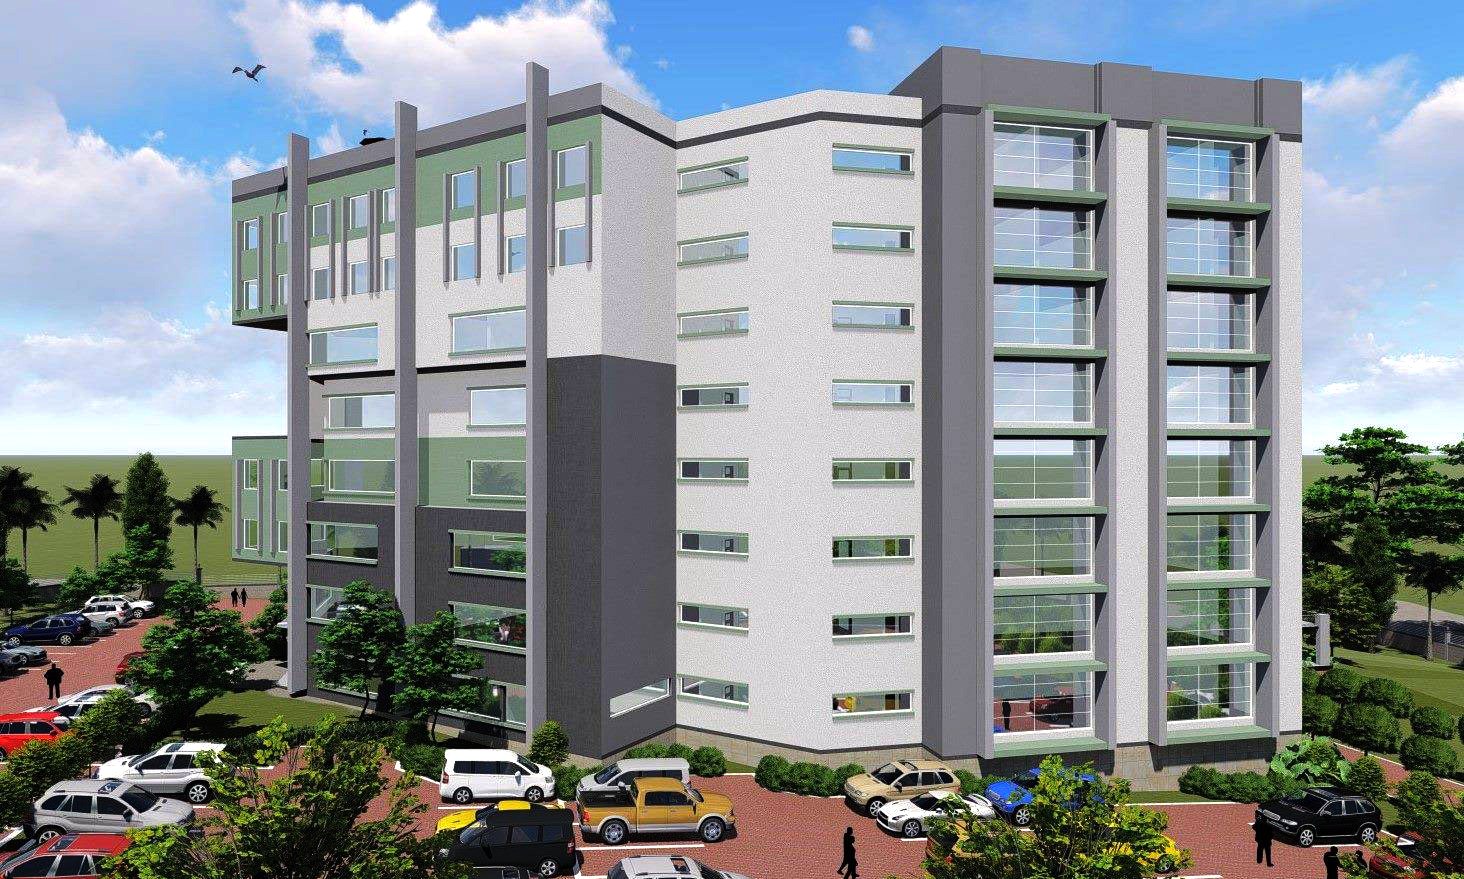 An artistic impression of the New School of Public Health (MakSPH) Building under construction at the Makerere University Main Campus.